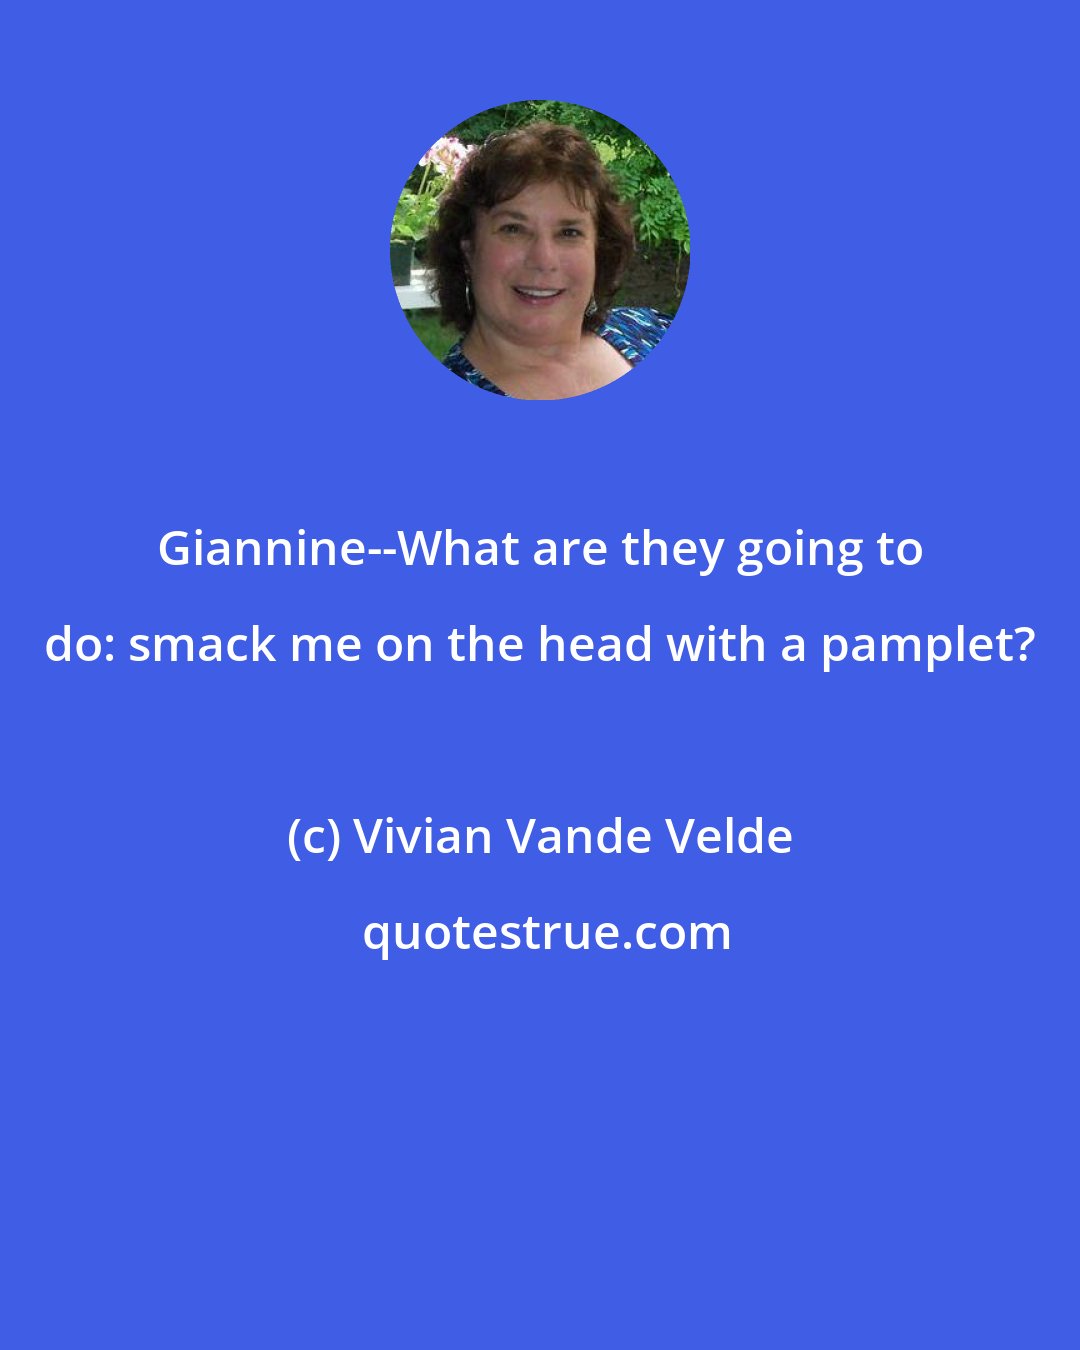 Vivian Vande Velde: Giannine--What are they going to do: smack me on the head with a pamplet?